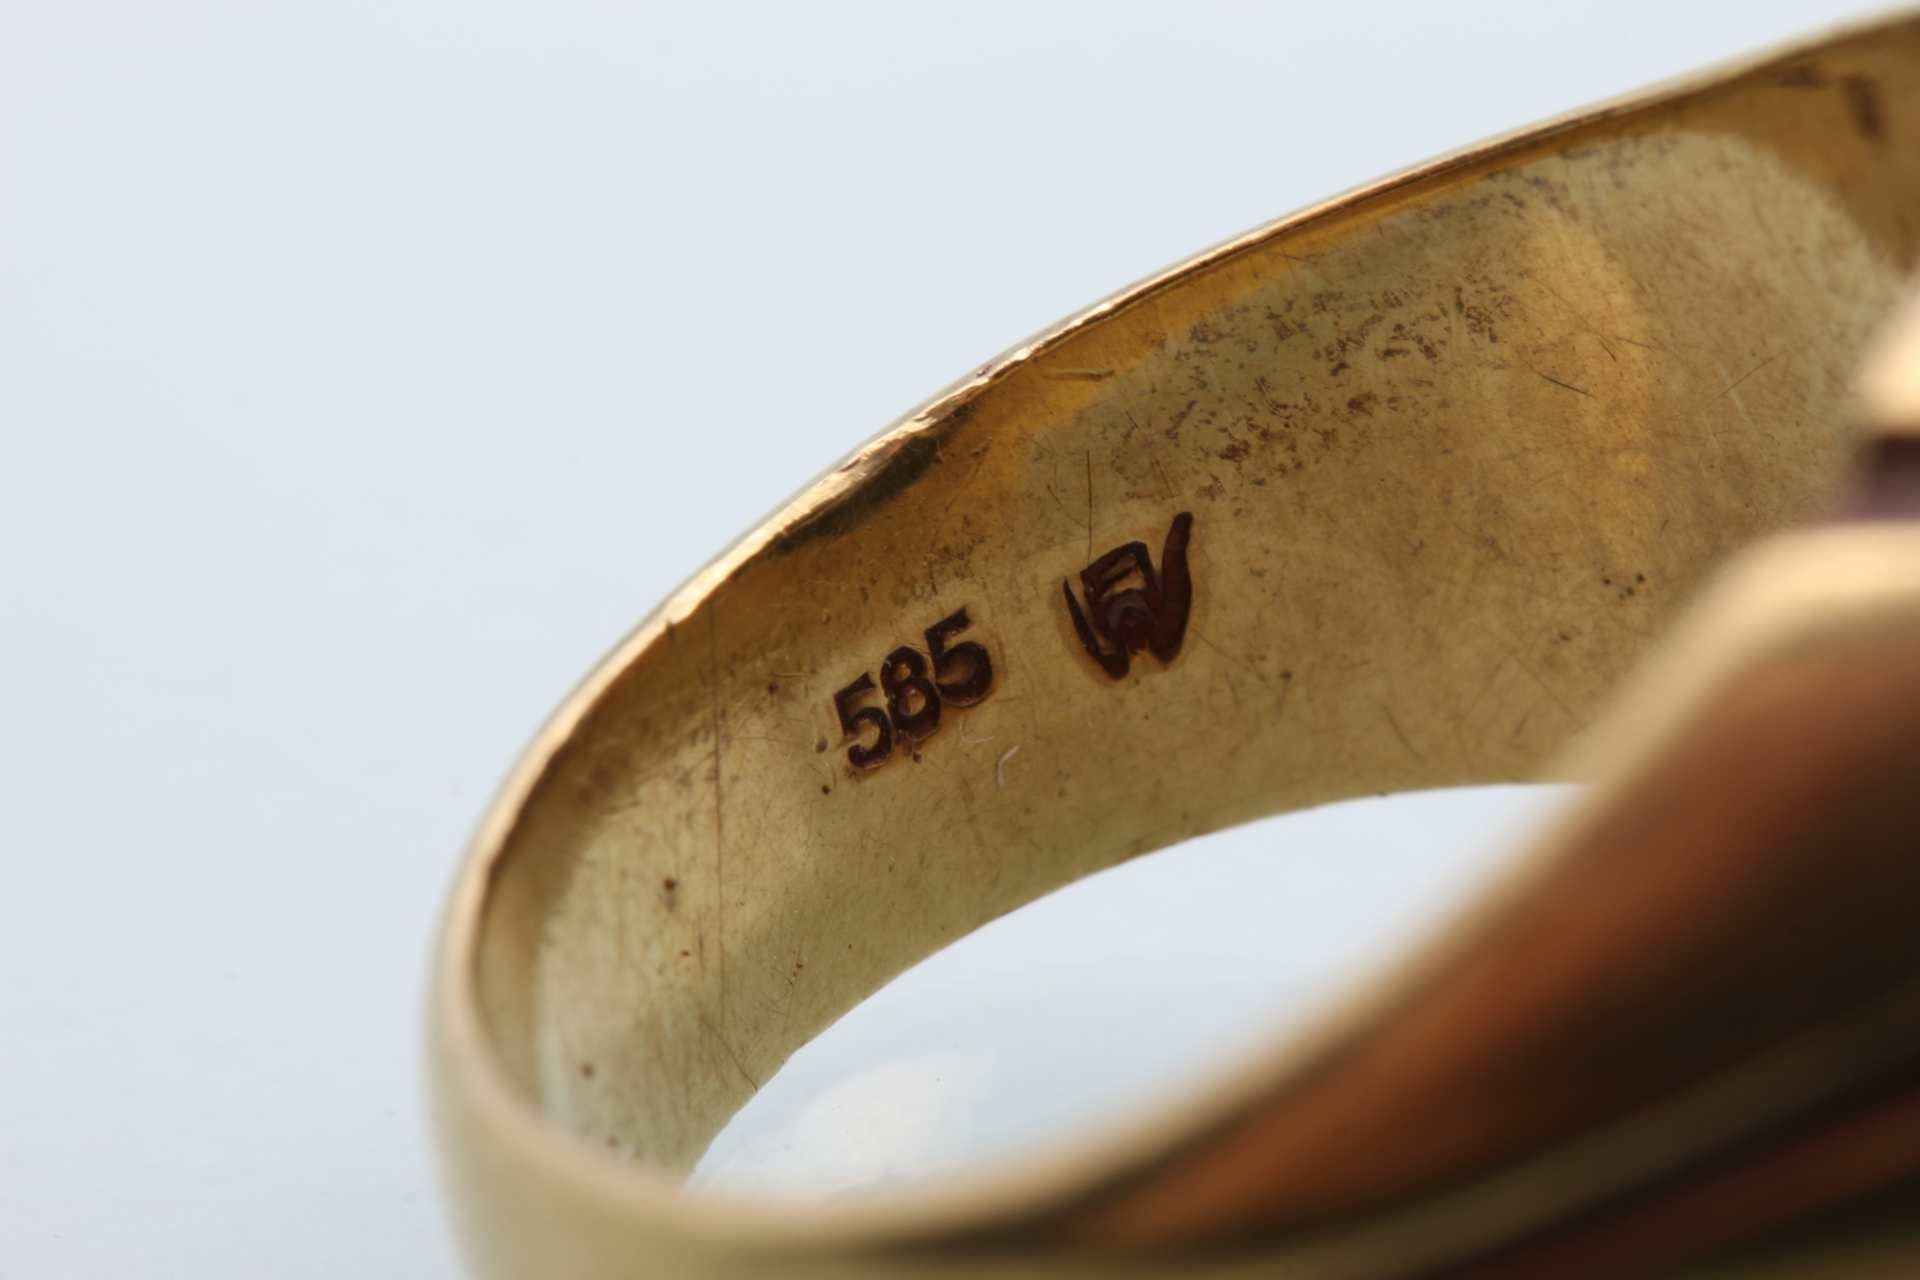 Massiver 585 Gold Siegelring, gold seal ring, - Image 6 of 6